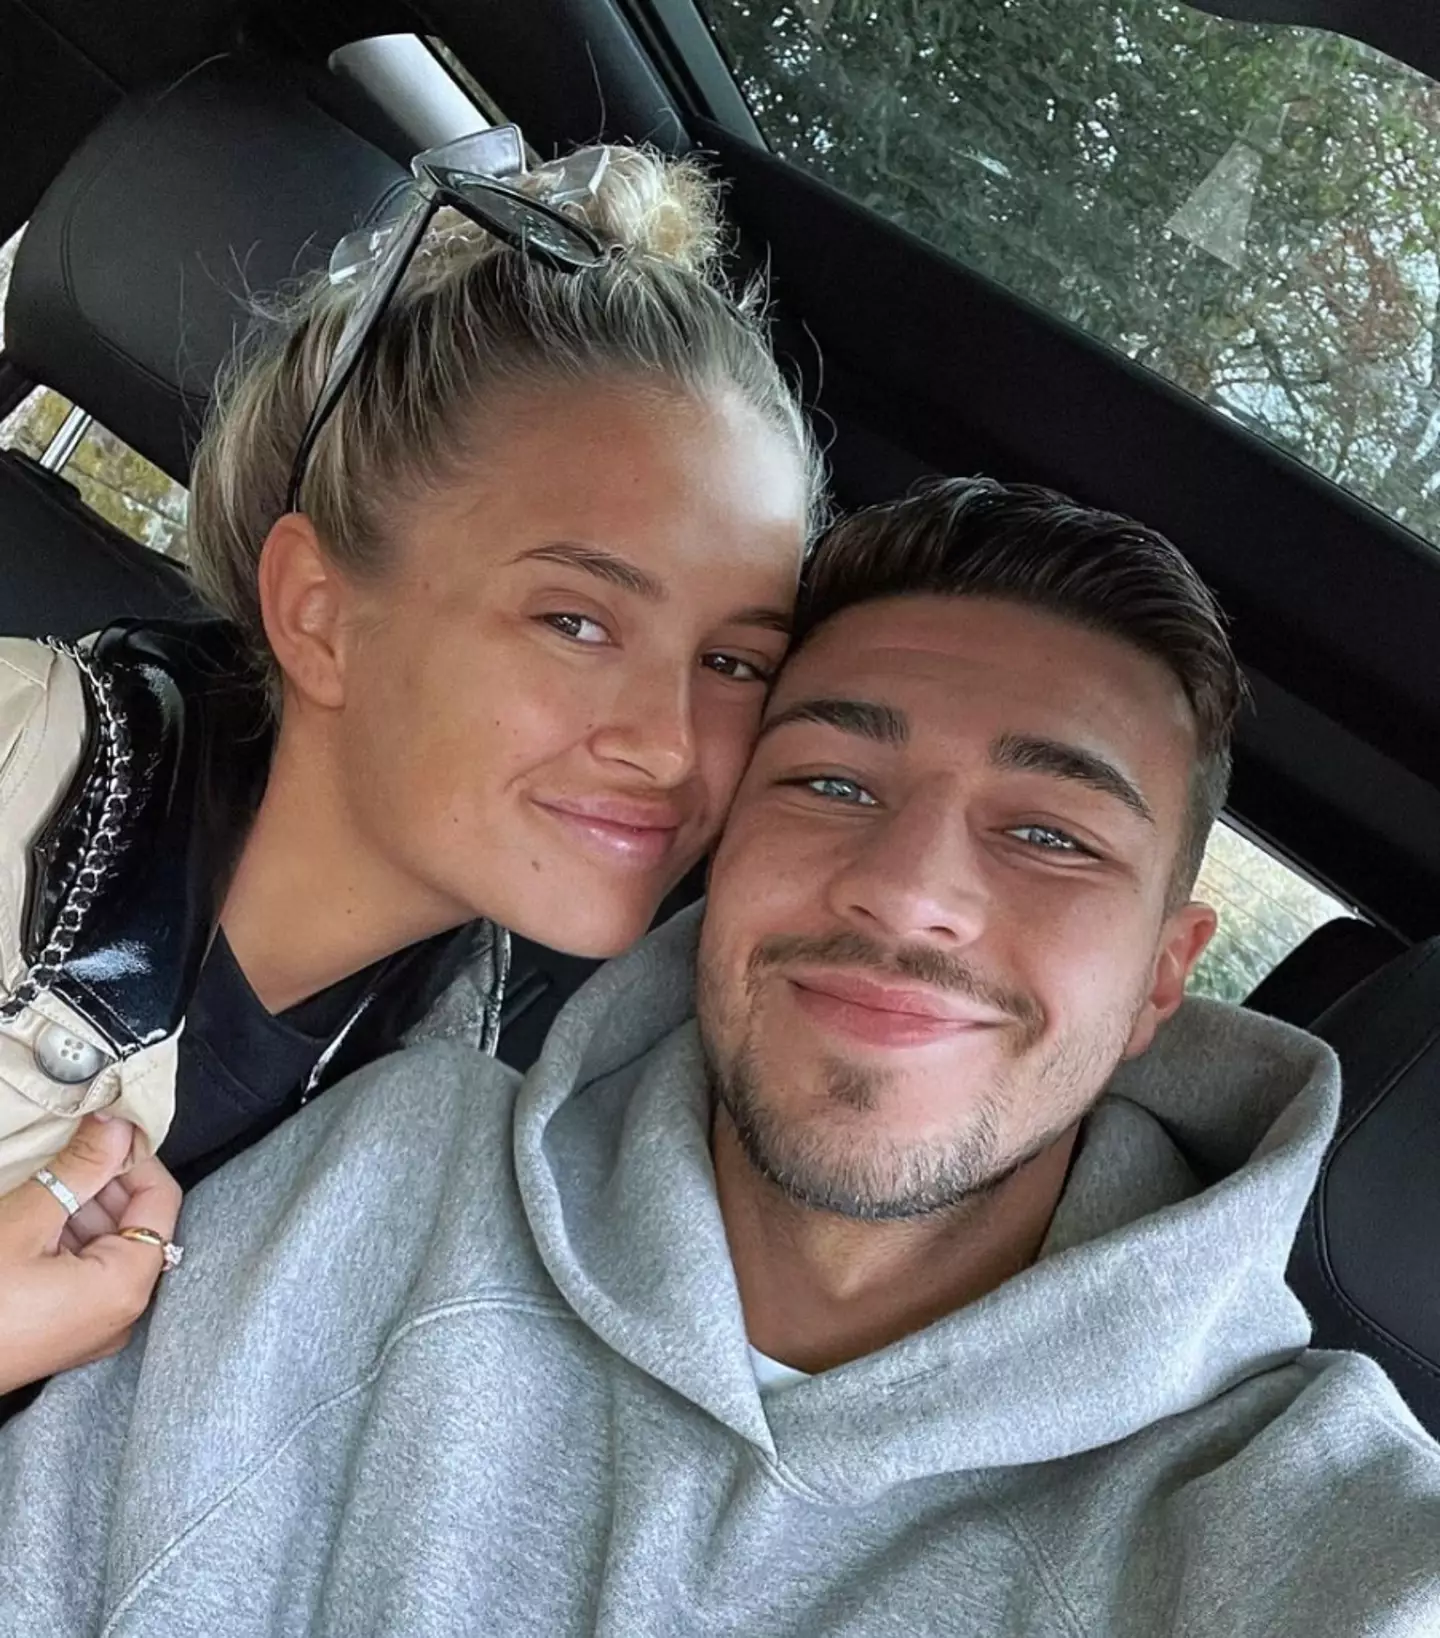 Tommy Fury said his proposal is happening 'soon'.